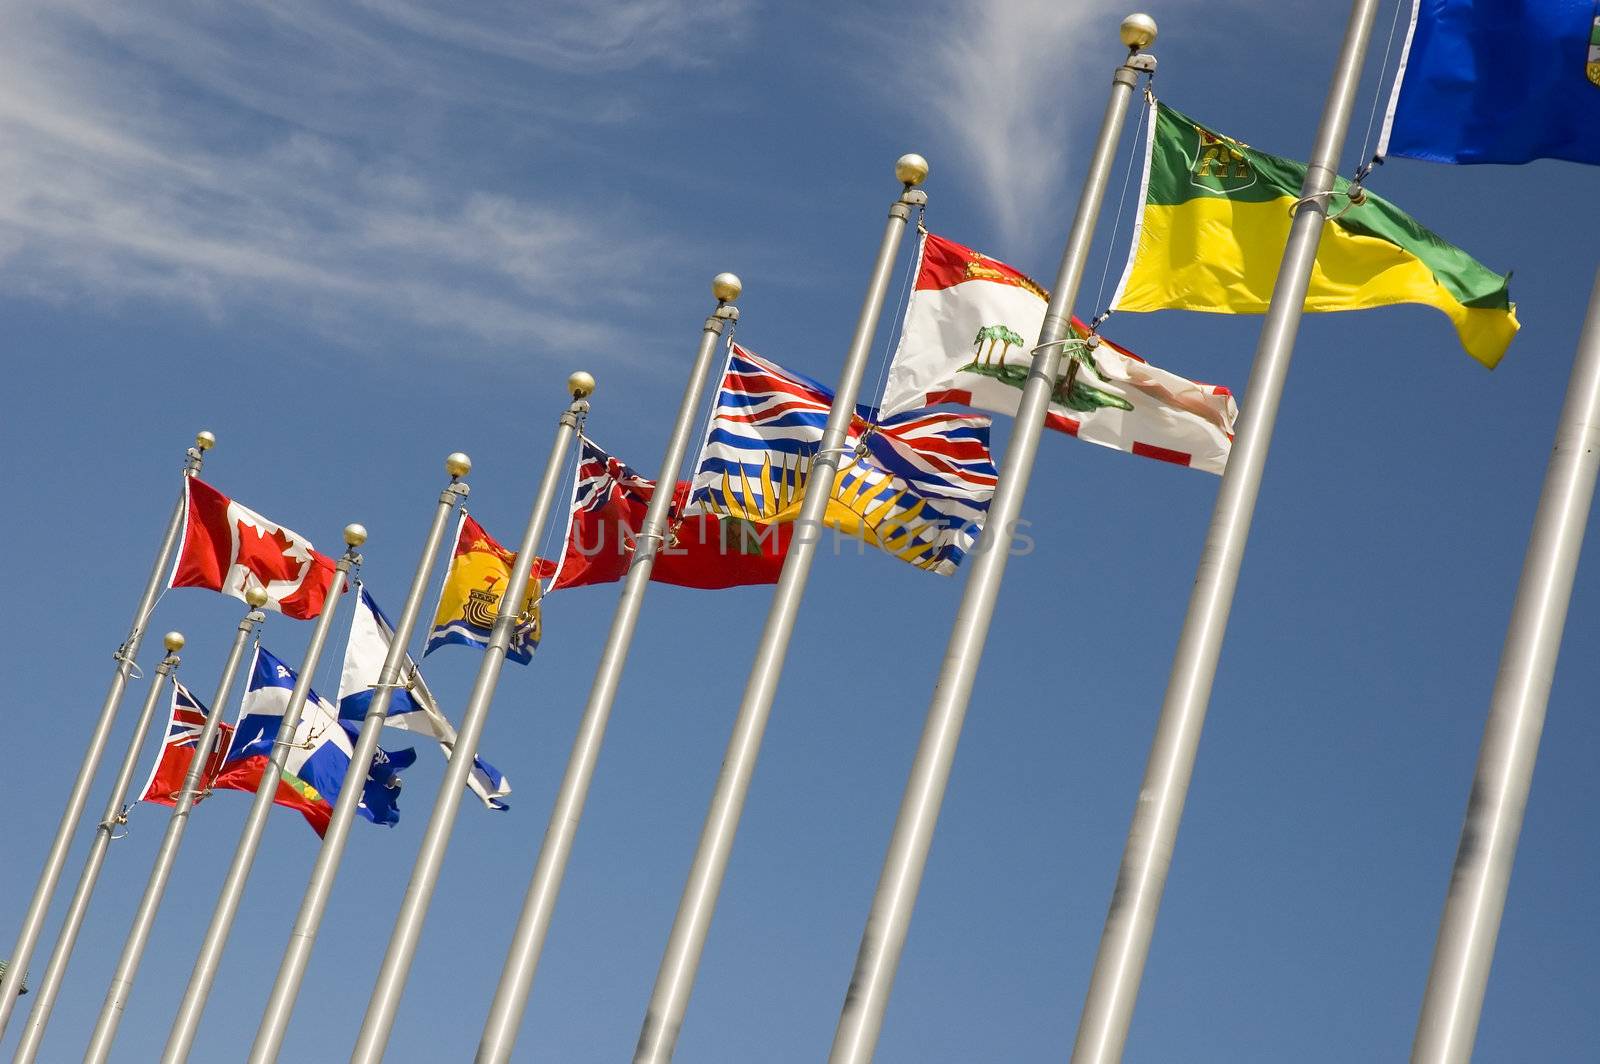 View of a douzen flags representing every province of Canada